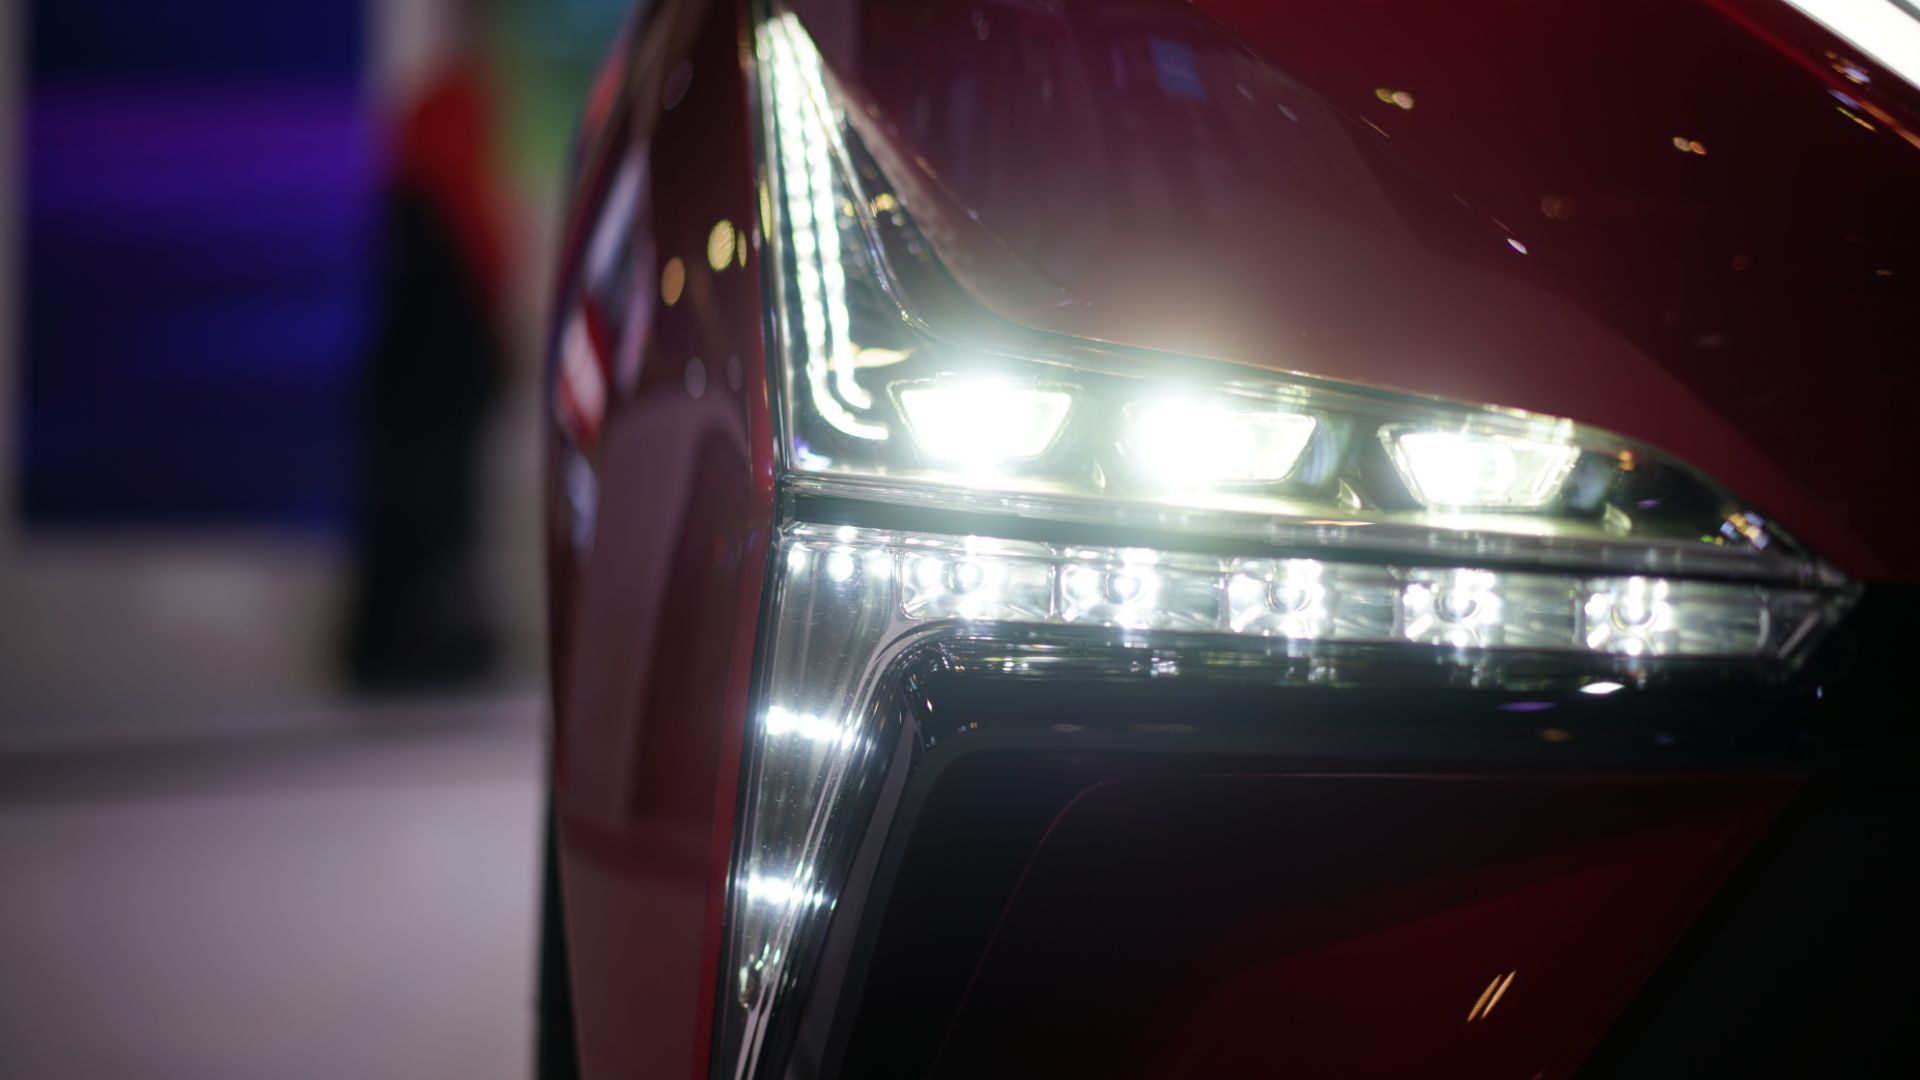 a close up of a red car headlight.